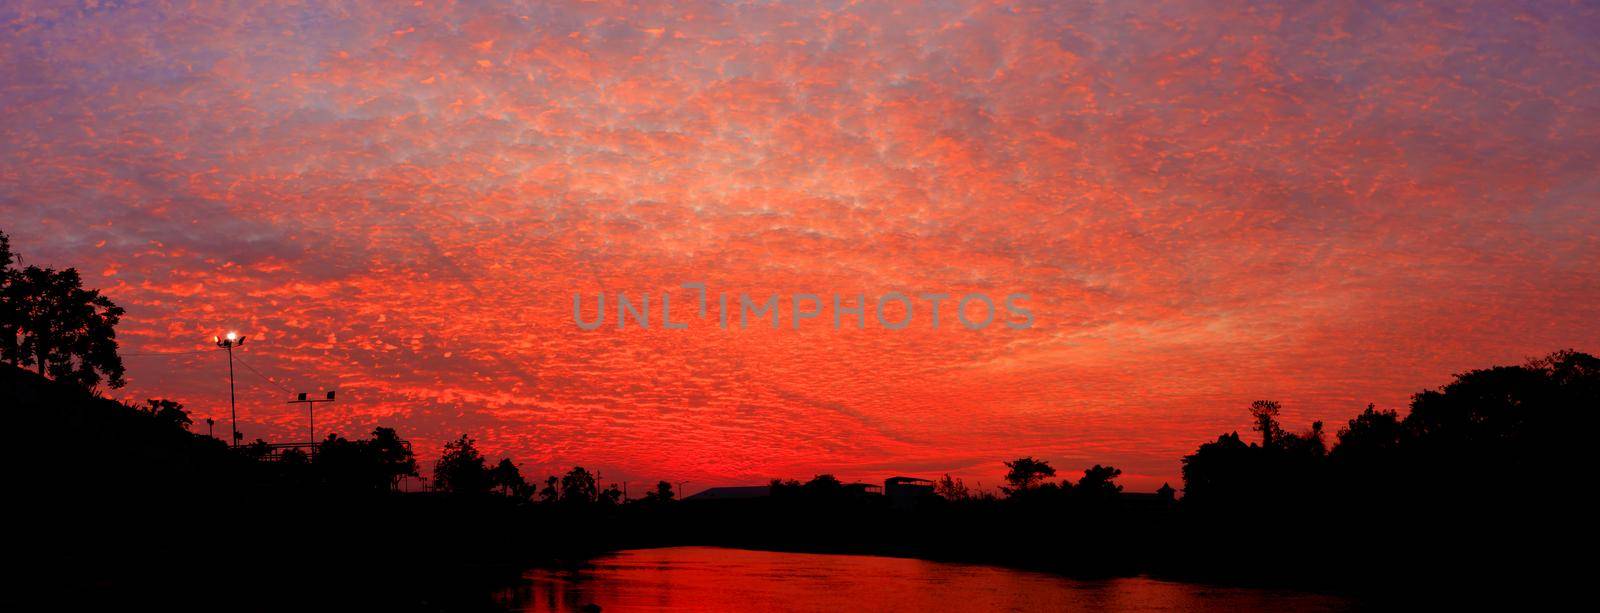 panorama sunset in red sky beautiful colorful landscape silhouette tree woodland and river reflect the twilight time by pramot